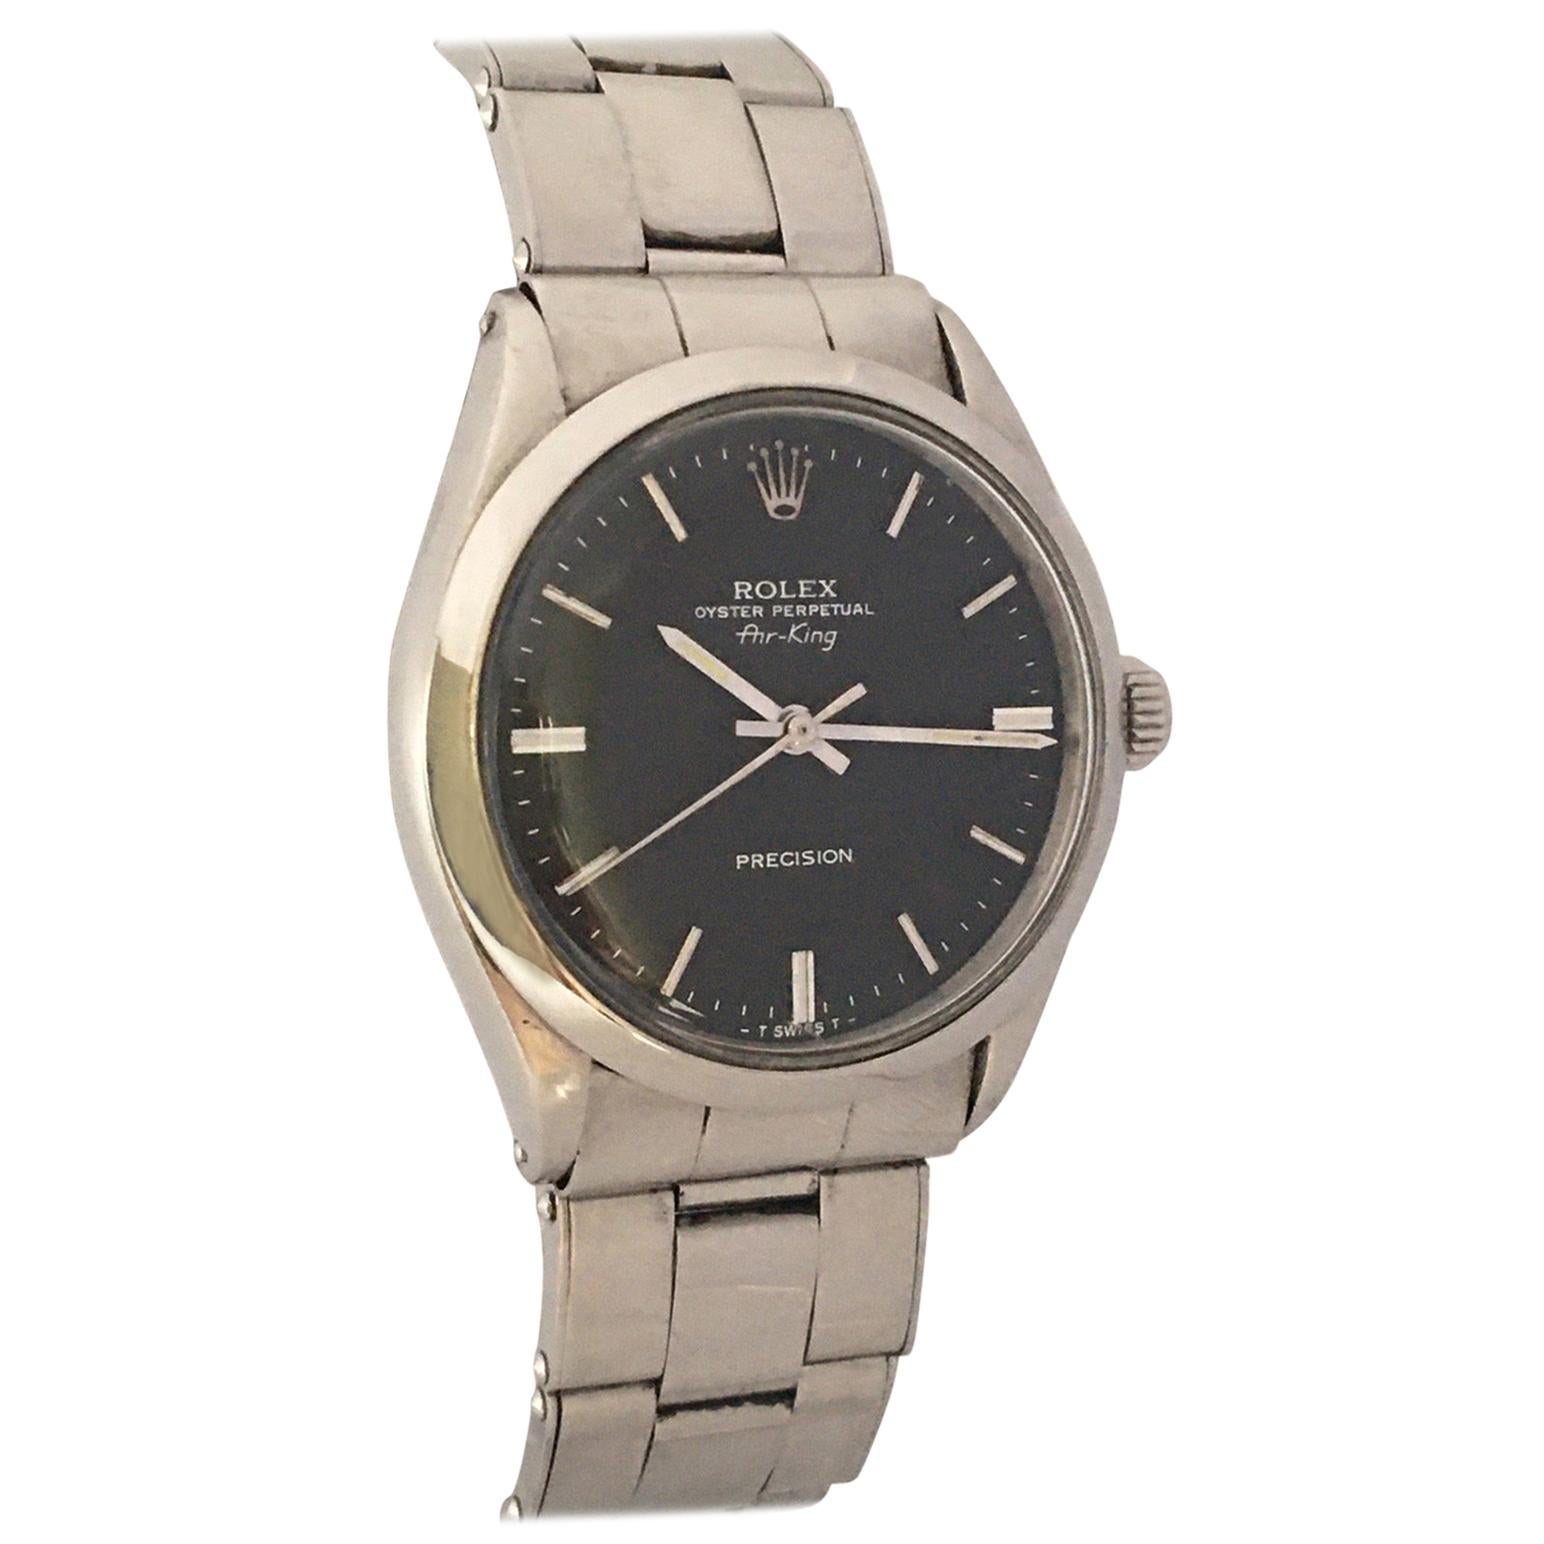 1960s SS Rolex Oyster Perpetual Air-King Precision, 1520 Mechanical Watch For Sale